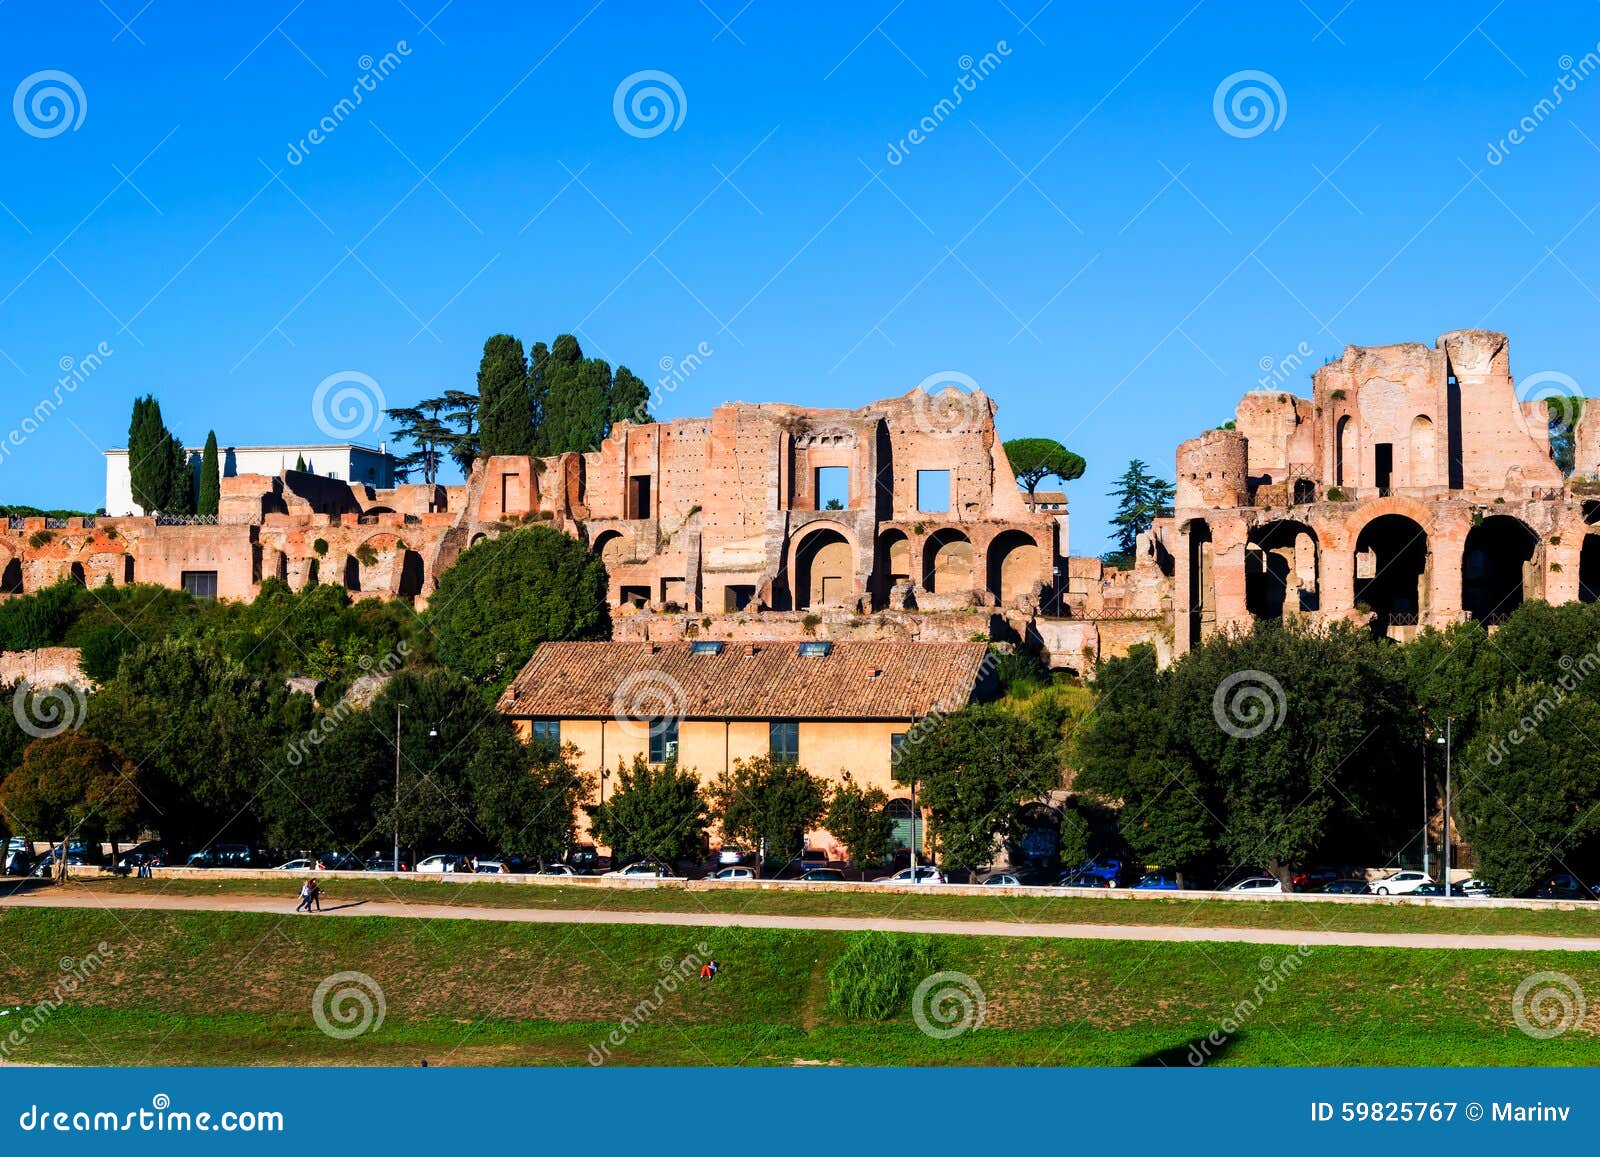 palatine hill in rome italy